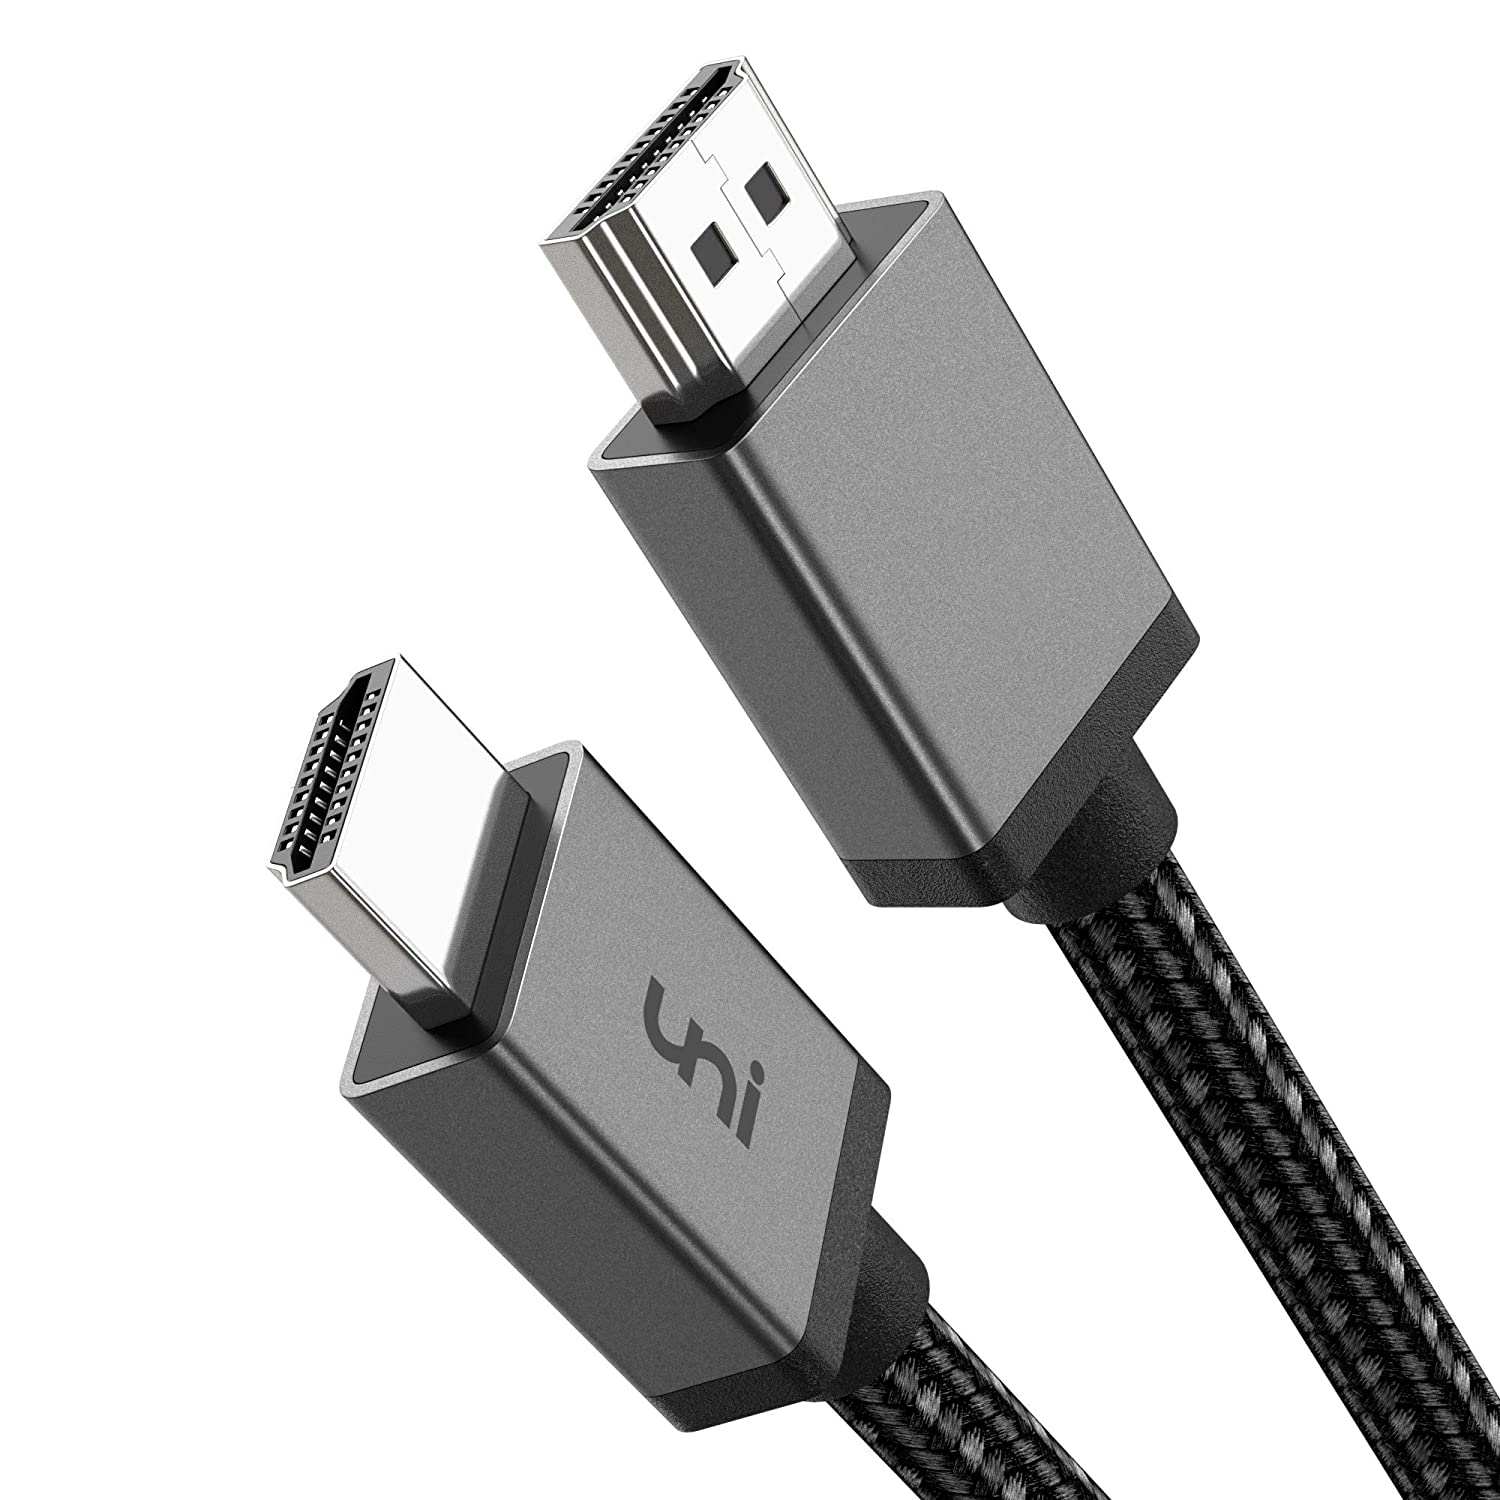 8K Mini HDMI to HDMI Cable HDMI 2.1 Cable Support 8K@60Hz 4K@120Hz